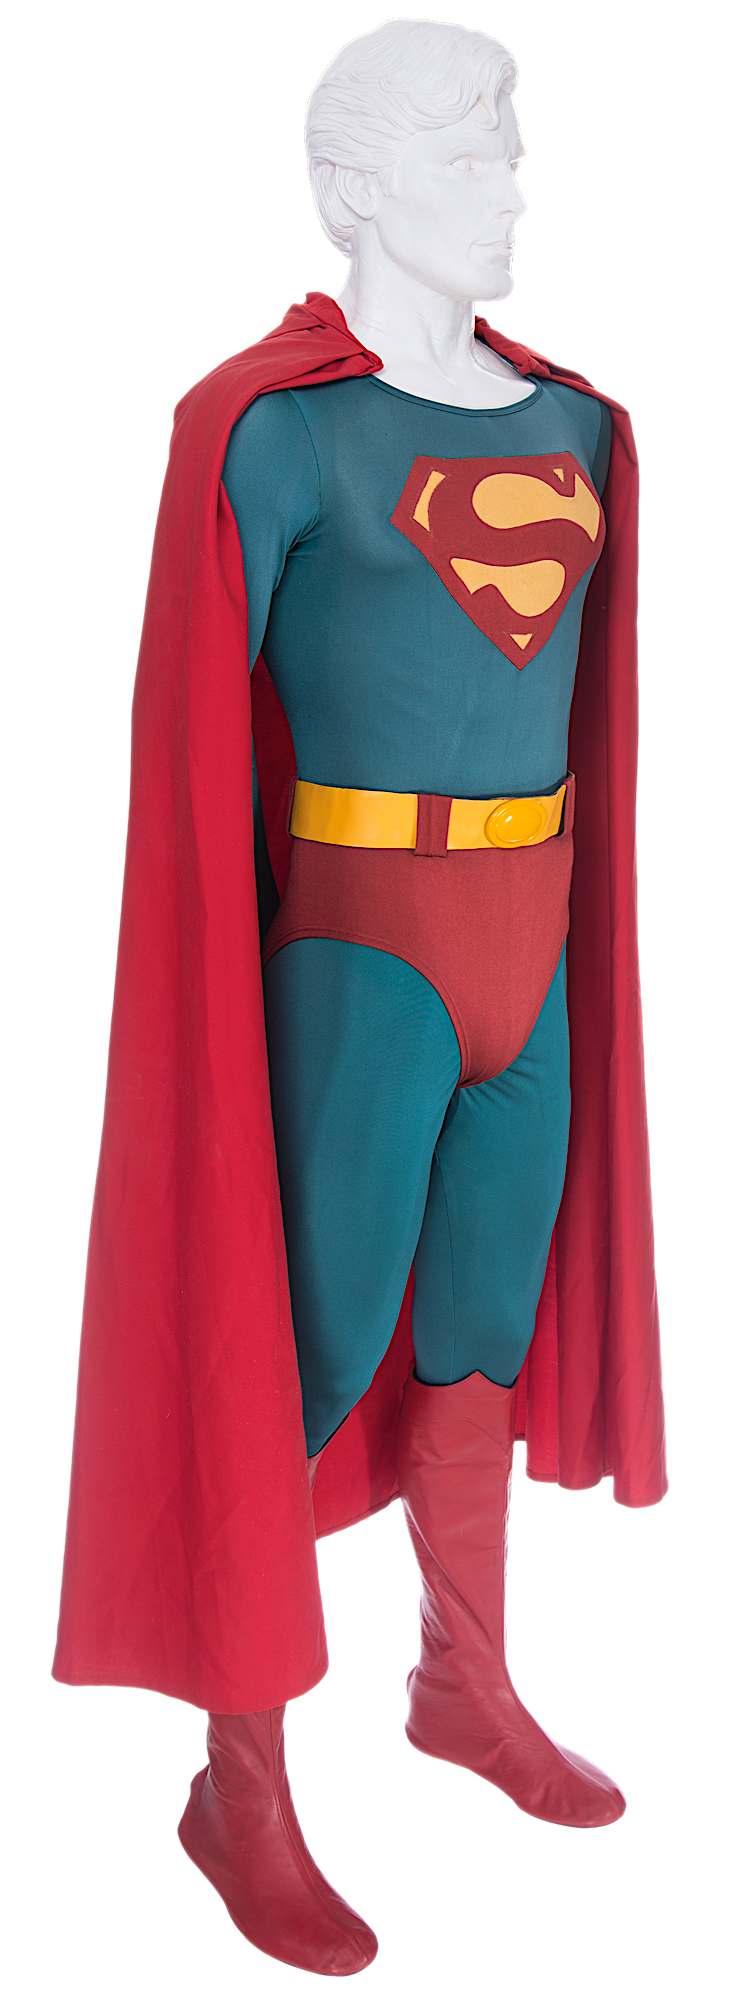 Superman III – Superman’s Bodysuit (Christopher Reeve) sold for $120,000 at the 2nd annual ScreenUsed live auction at Silicon Valley Comic Con.